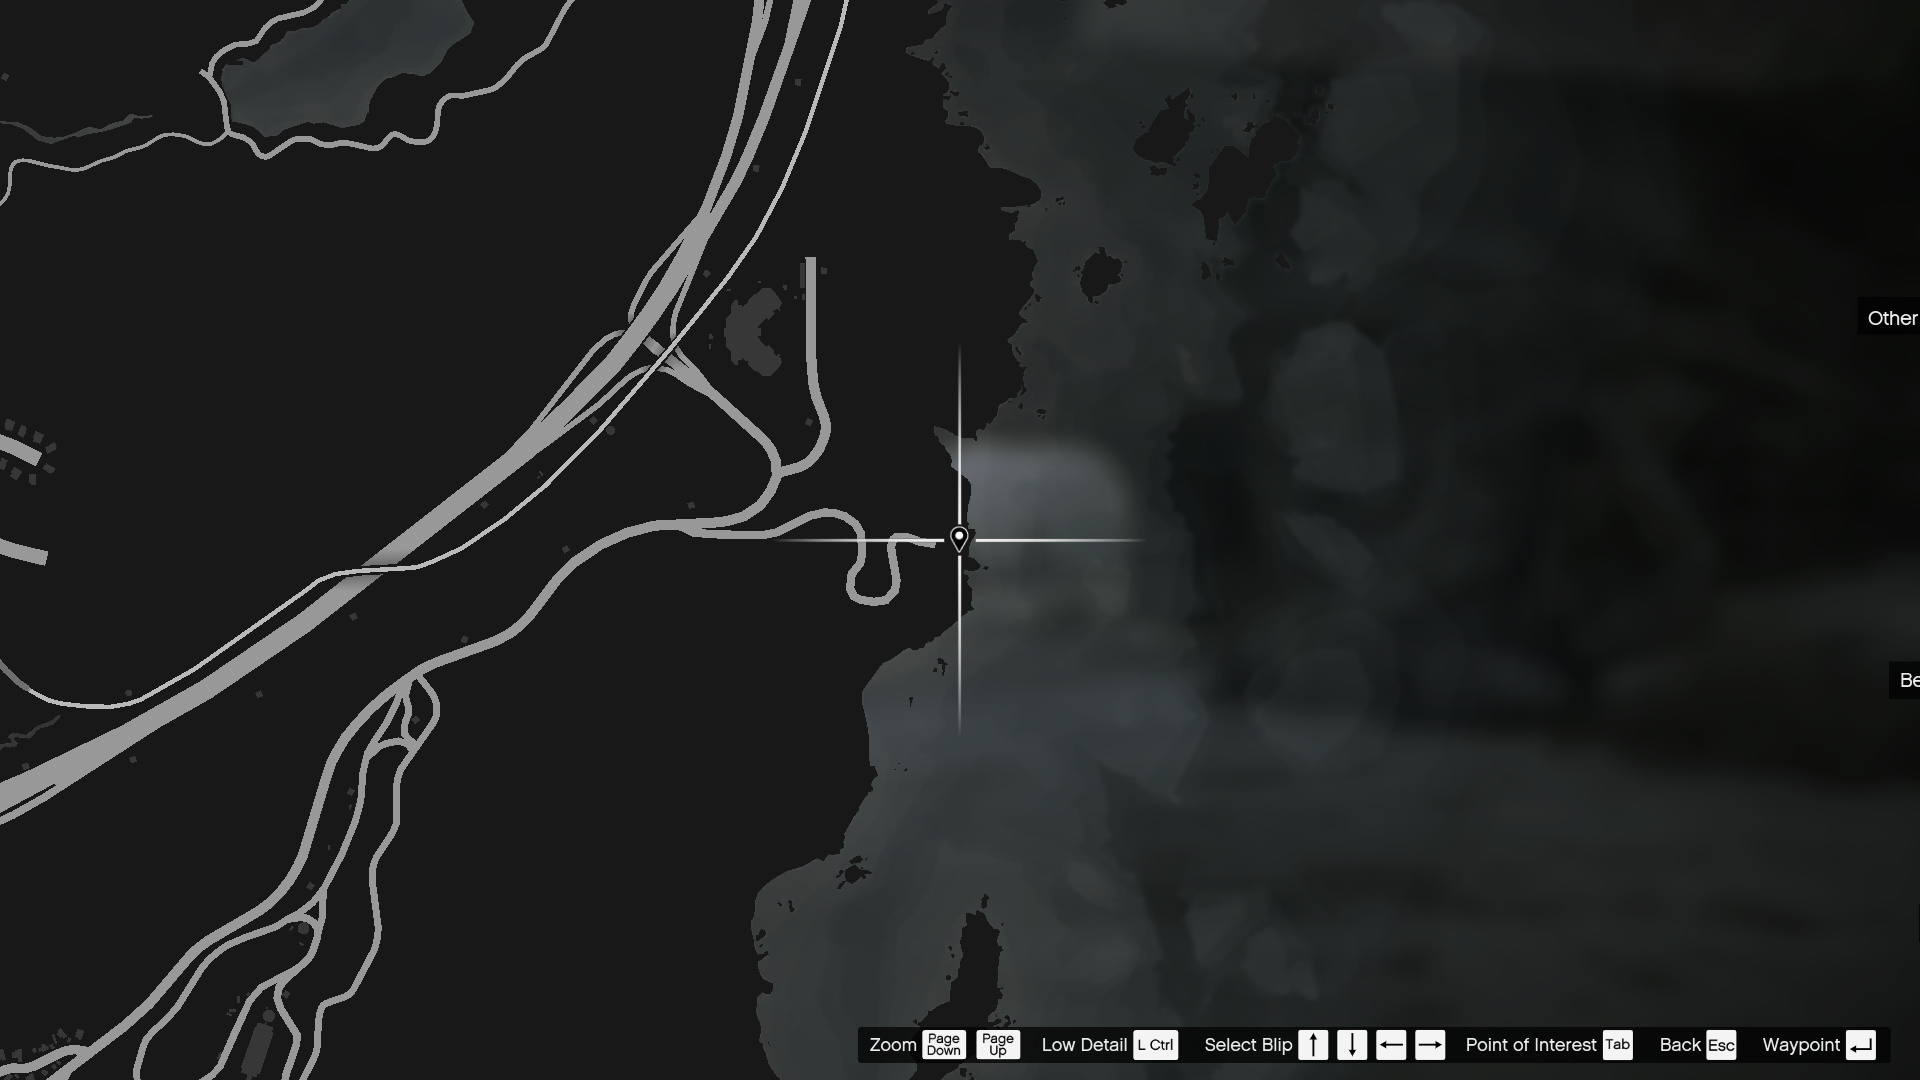 a screenshot of the gta 5 map showing the exact location of the cove